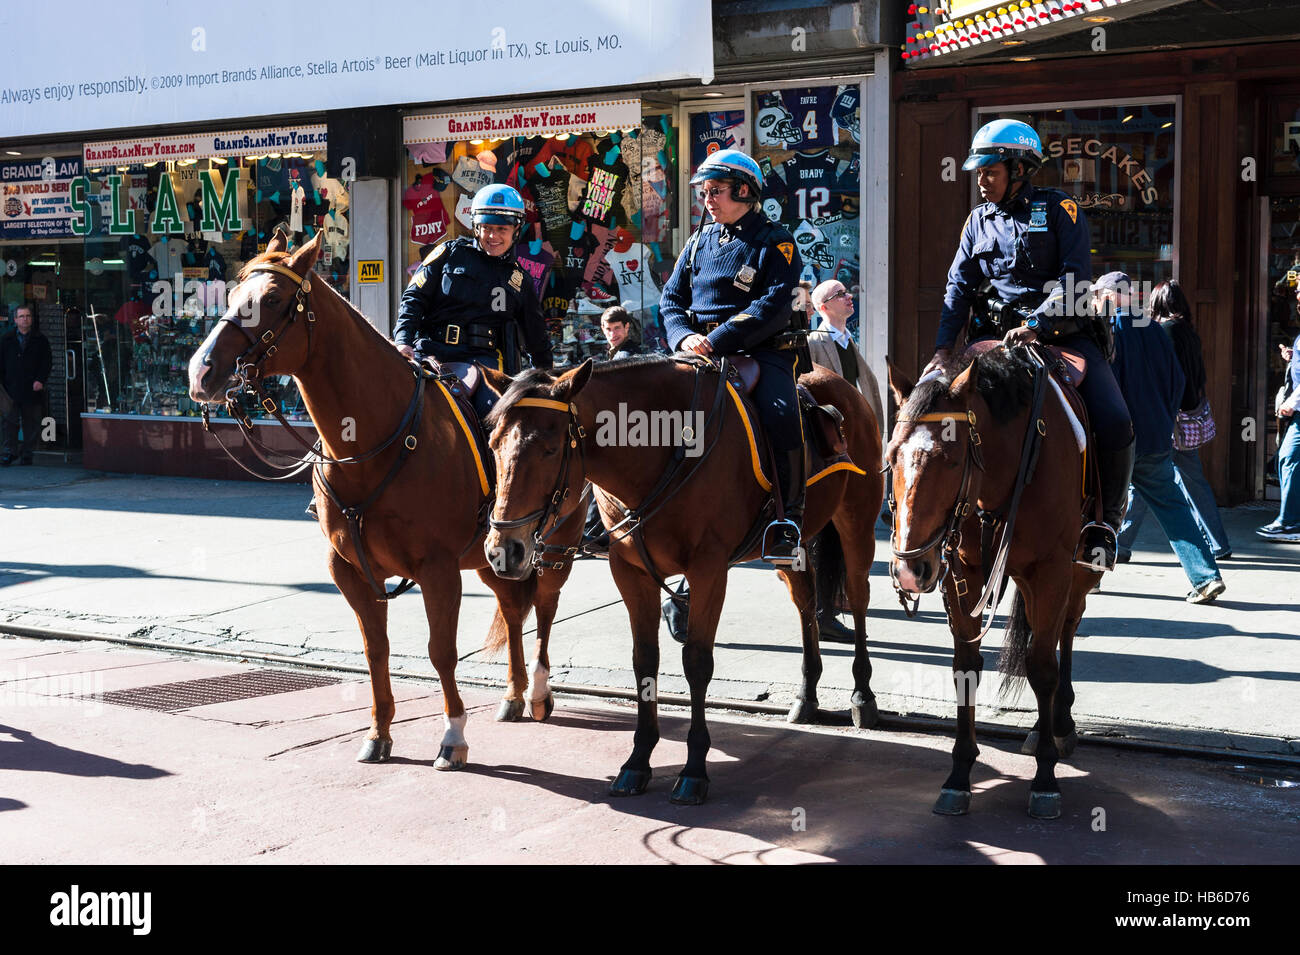 Policing, three female police officers on horses patrol Times Square in Manhattan, New York City, during the day Stock Photo